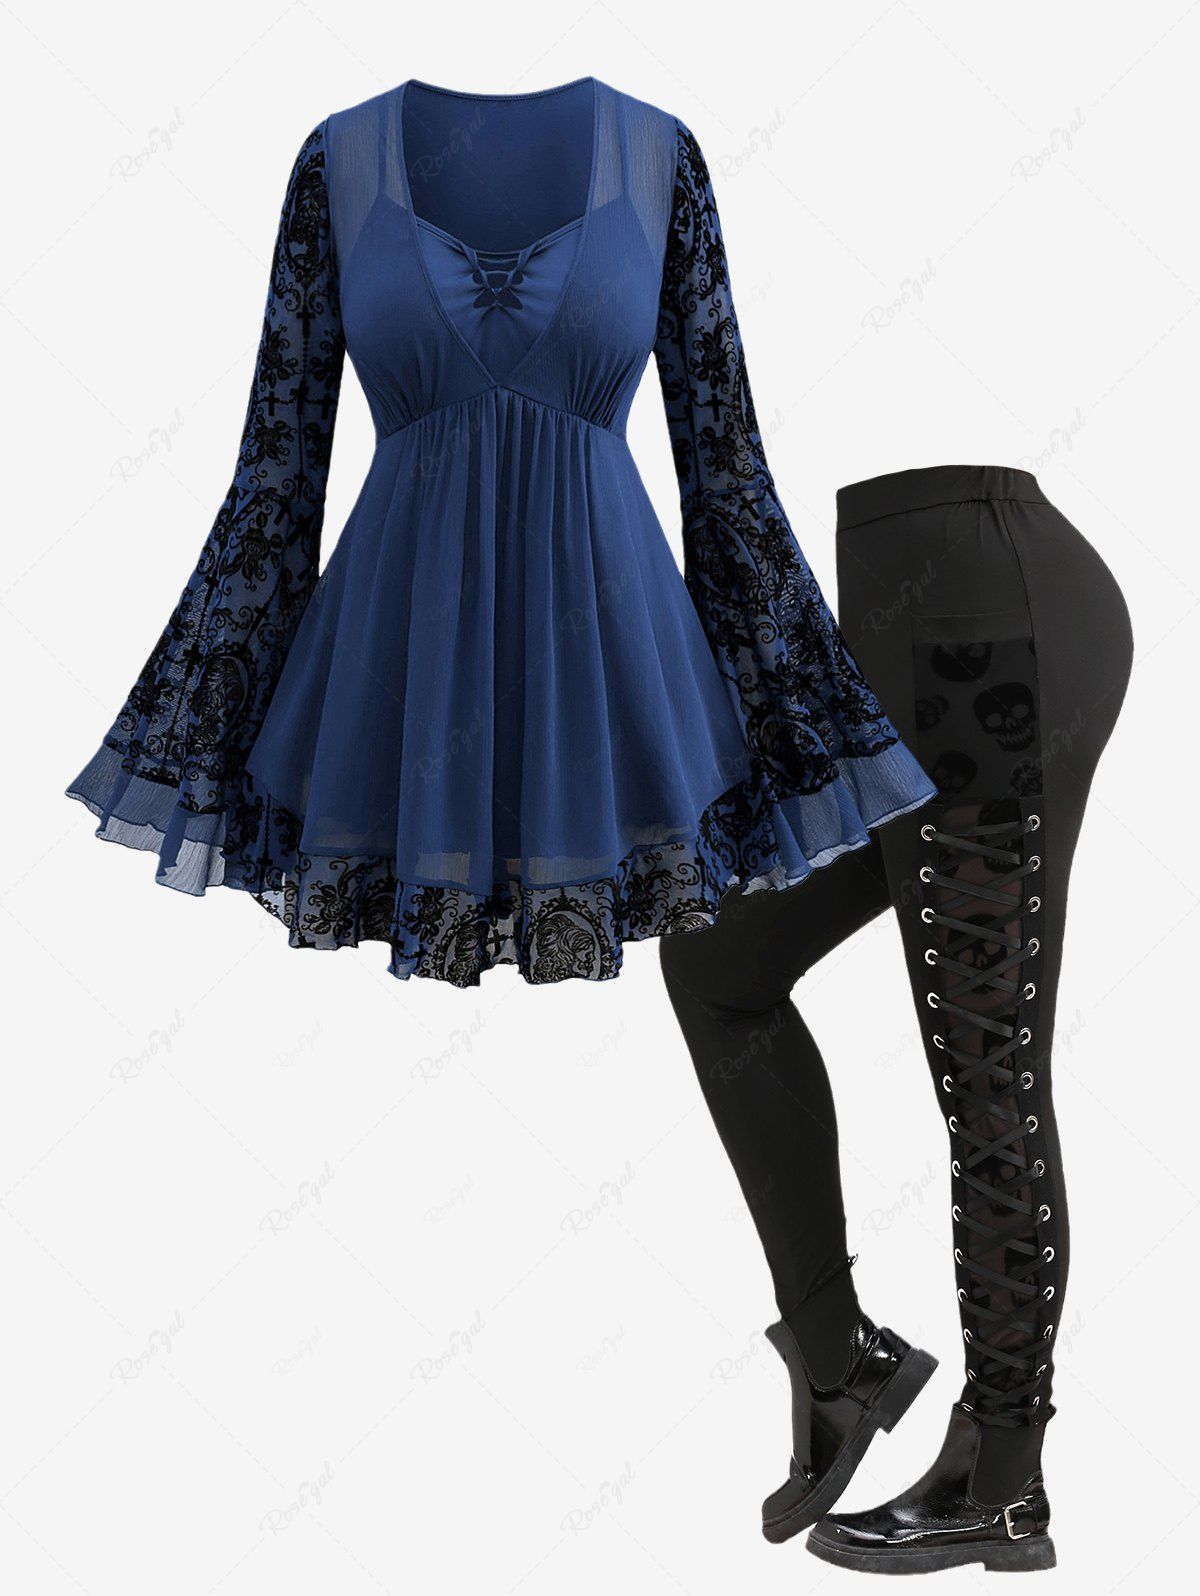 Trendy Plus Size Braided Panel Ruched Floral Lace Bell Sleeves T-shirt and Skull Grommets Lace Up Leggings Outfit  